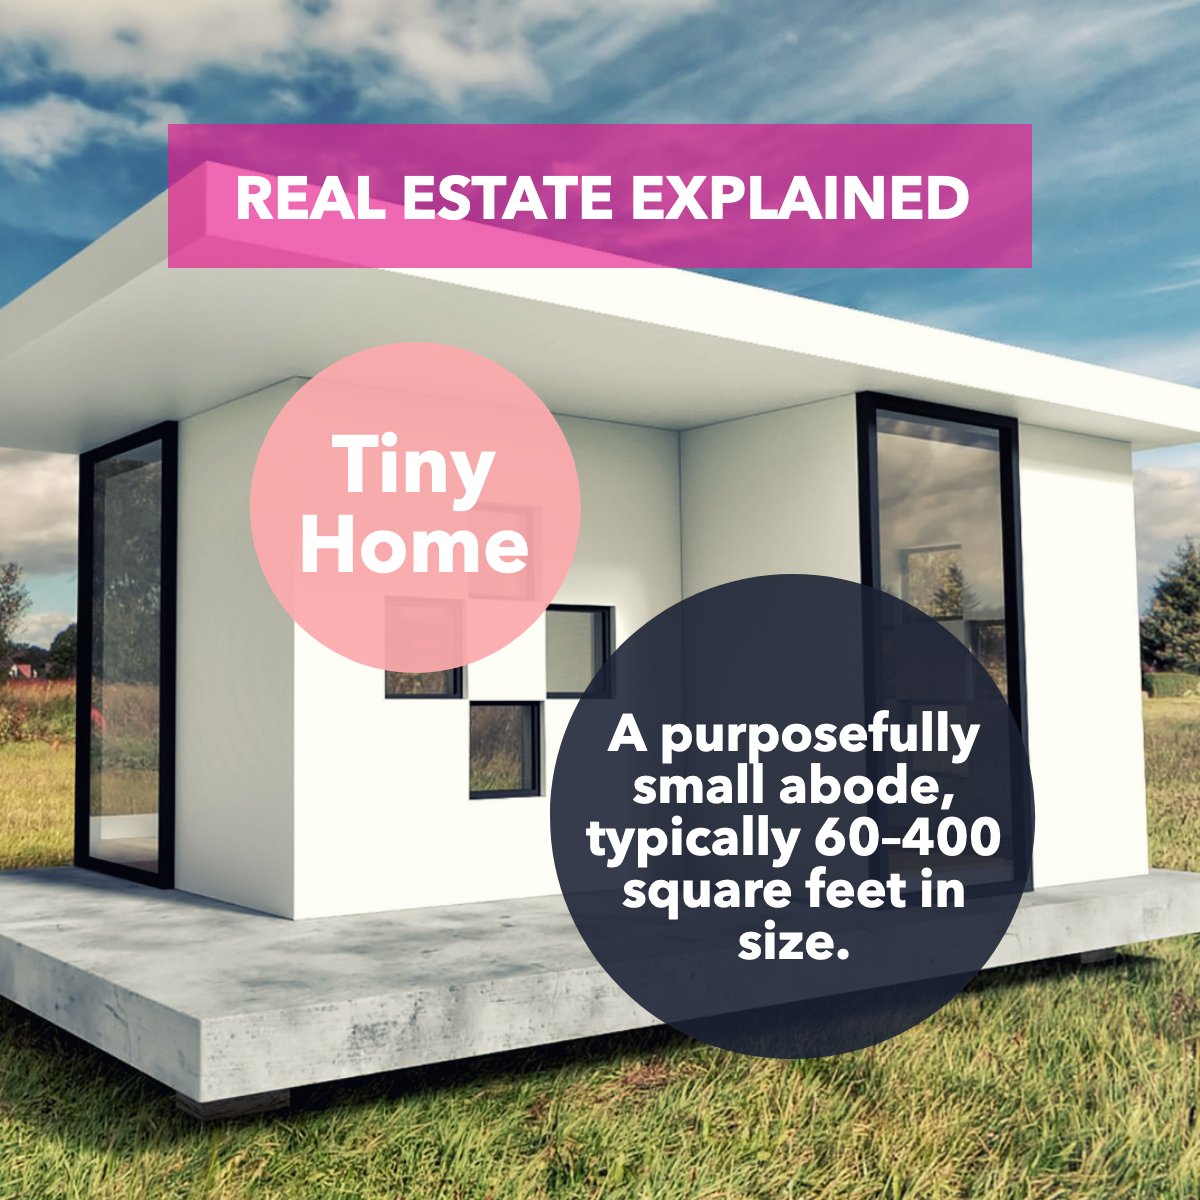 Did you know what a Tiny Home is? 🏡

Let us know below!

#tinyhomes #tinylovelyhome #tinyhomestyle